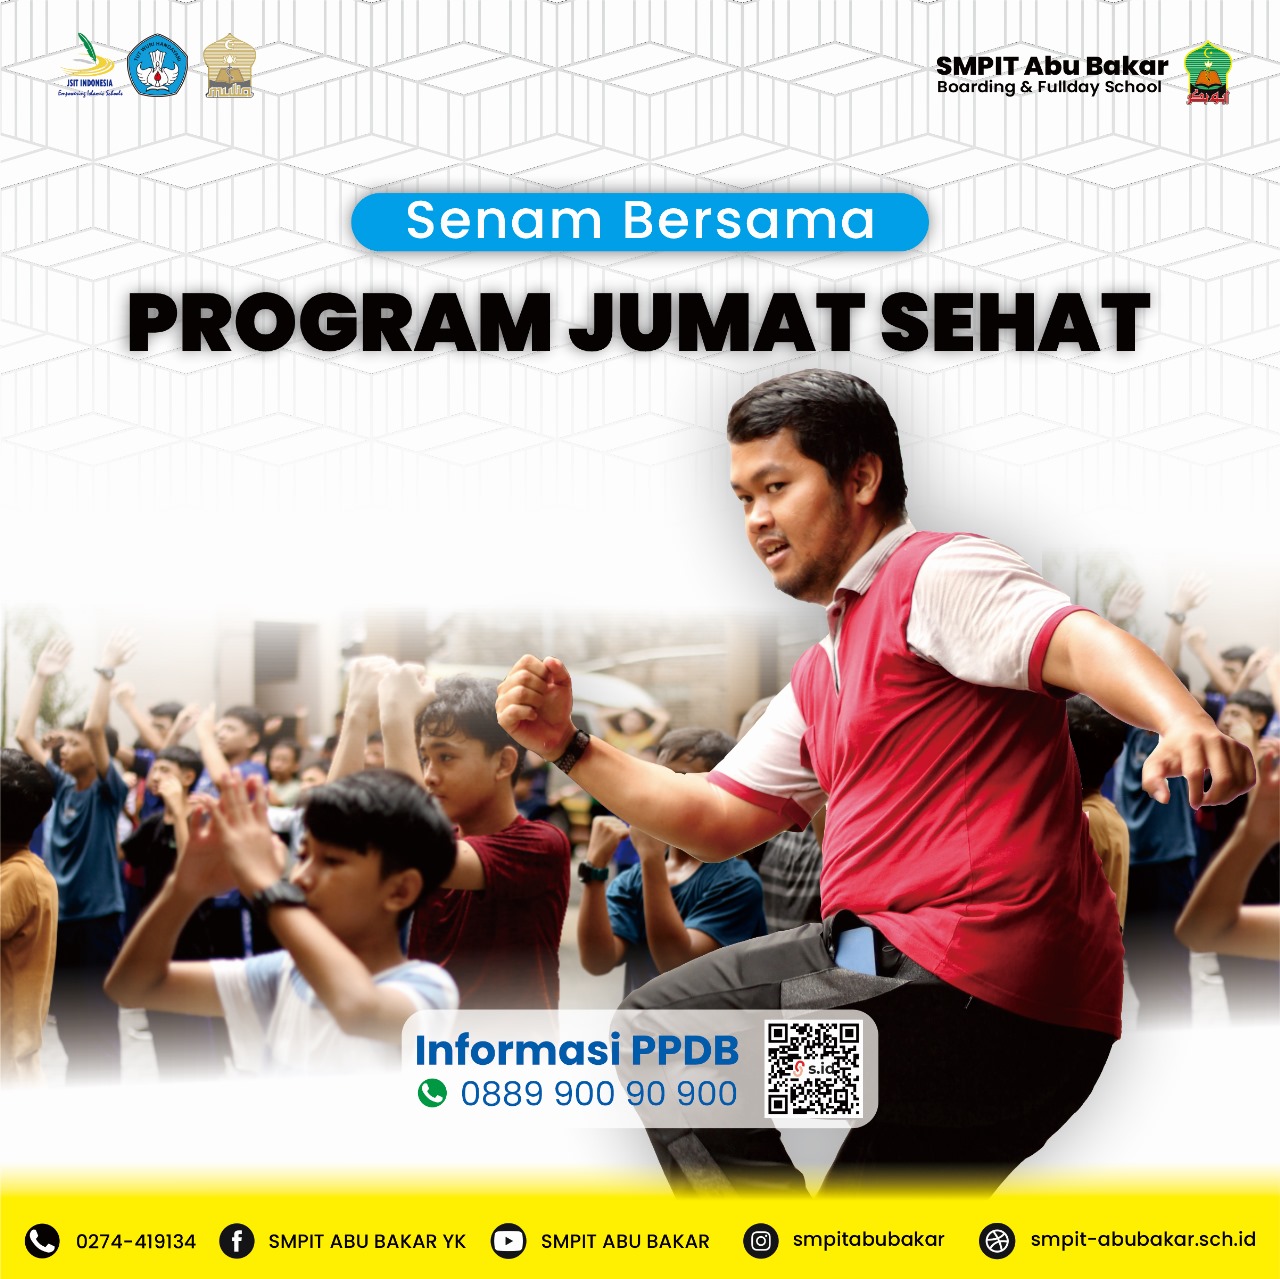 Read more about the article PROGRAM JUM’AT SEHAT